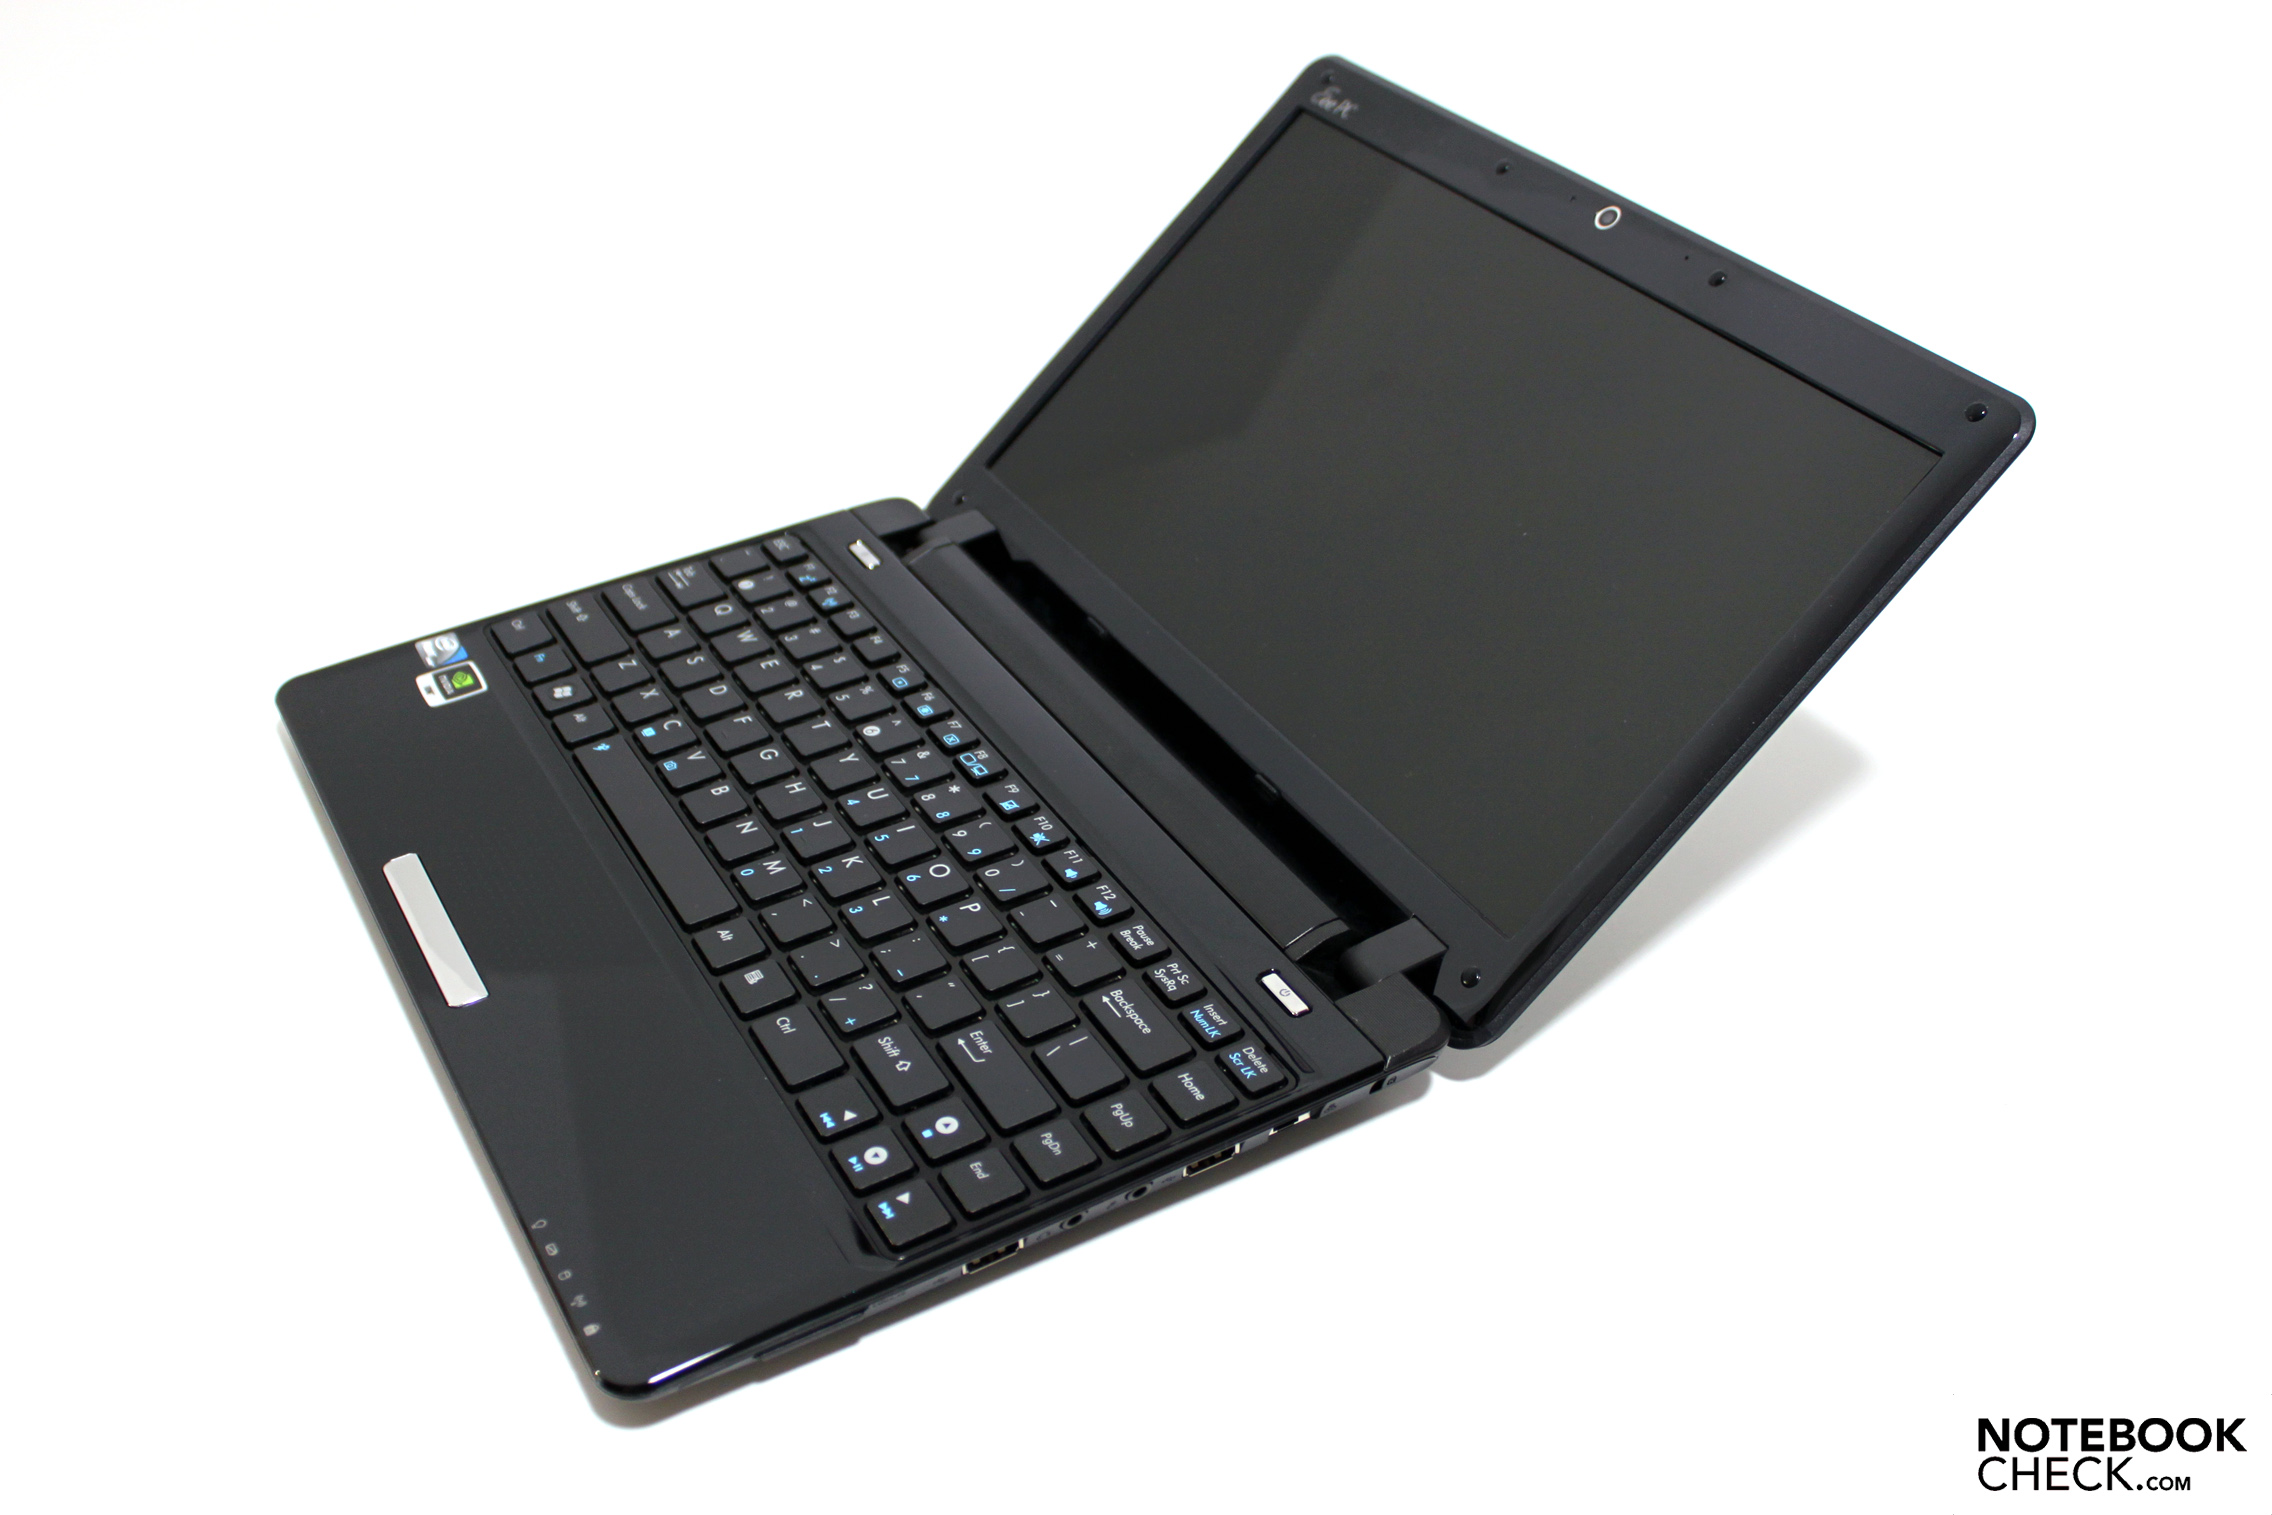 Asus Eee PC 1201PN - Notebookcheck.org